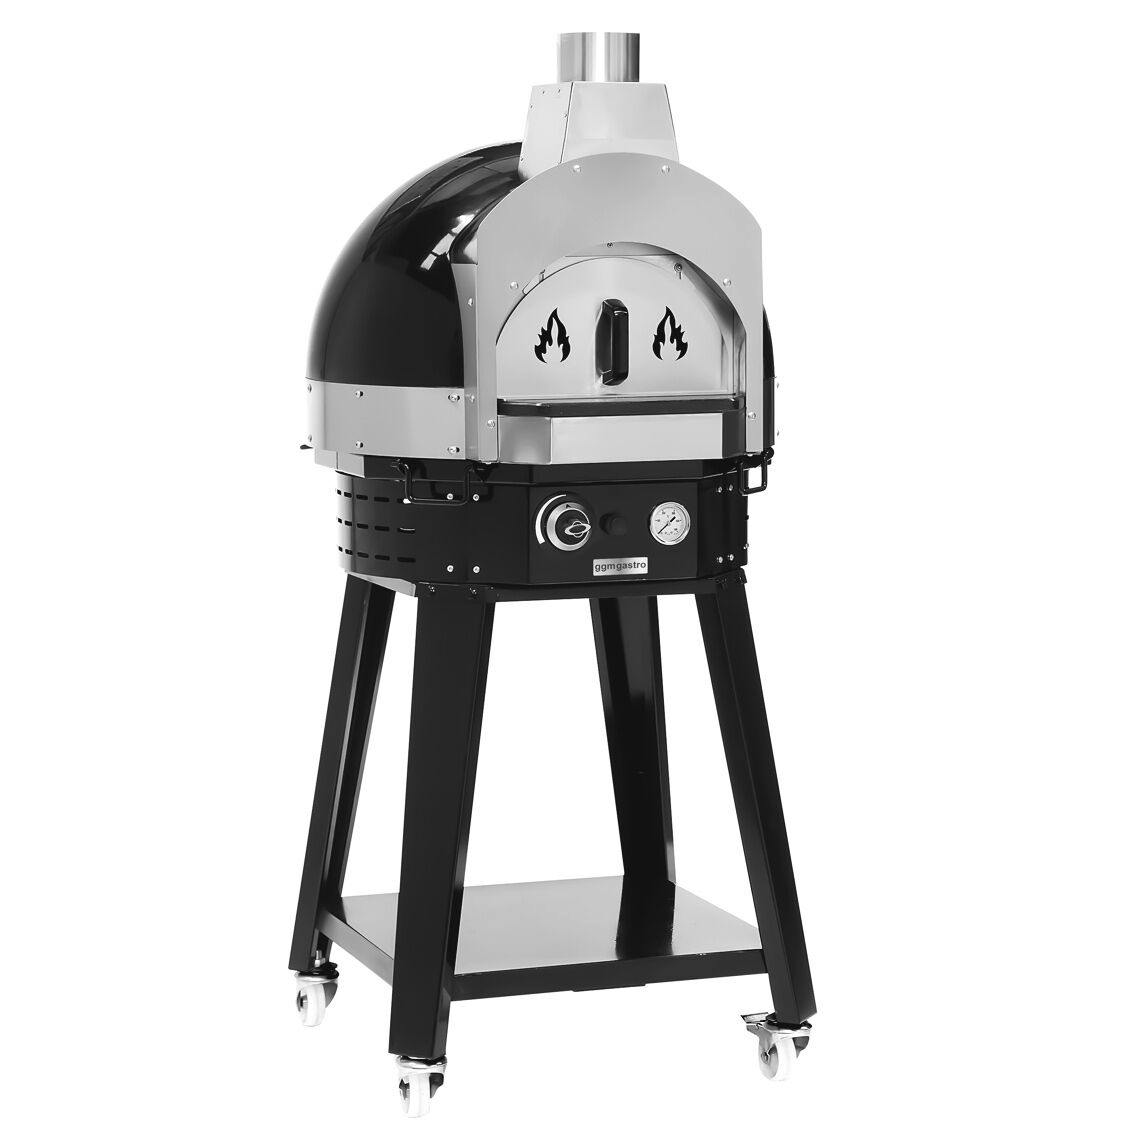 Gas pizza oven - Black - Height: 0.77m - Manual - incl. base frame